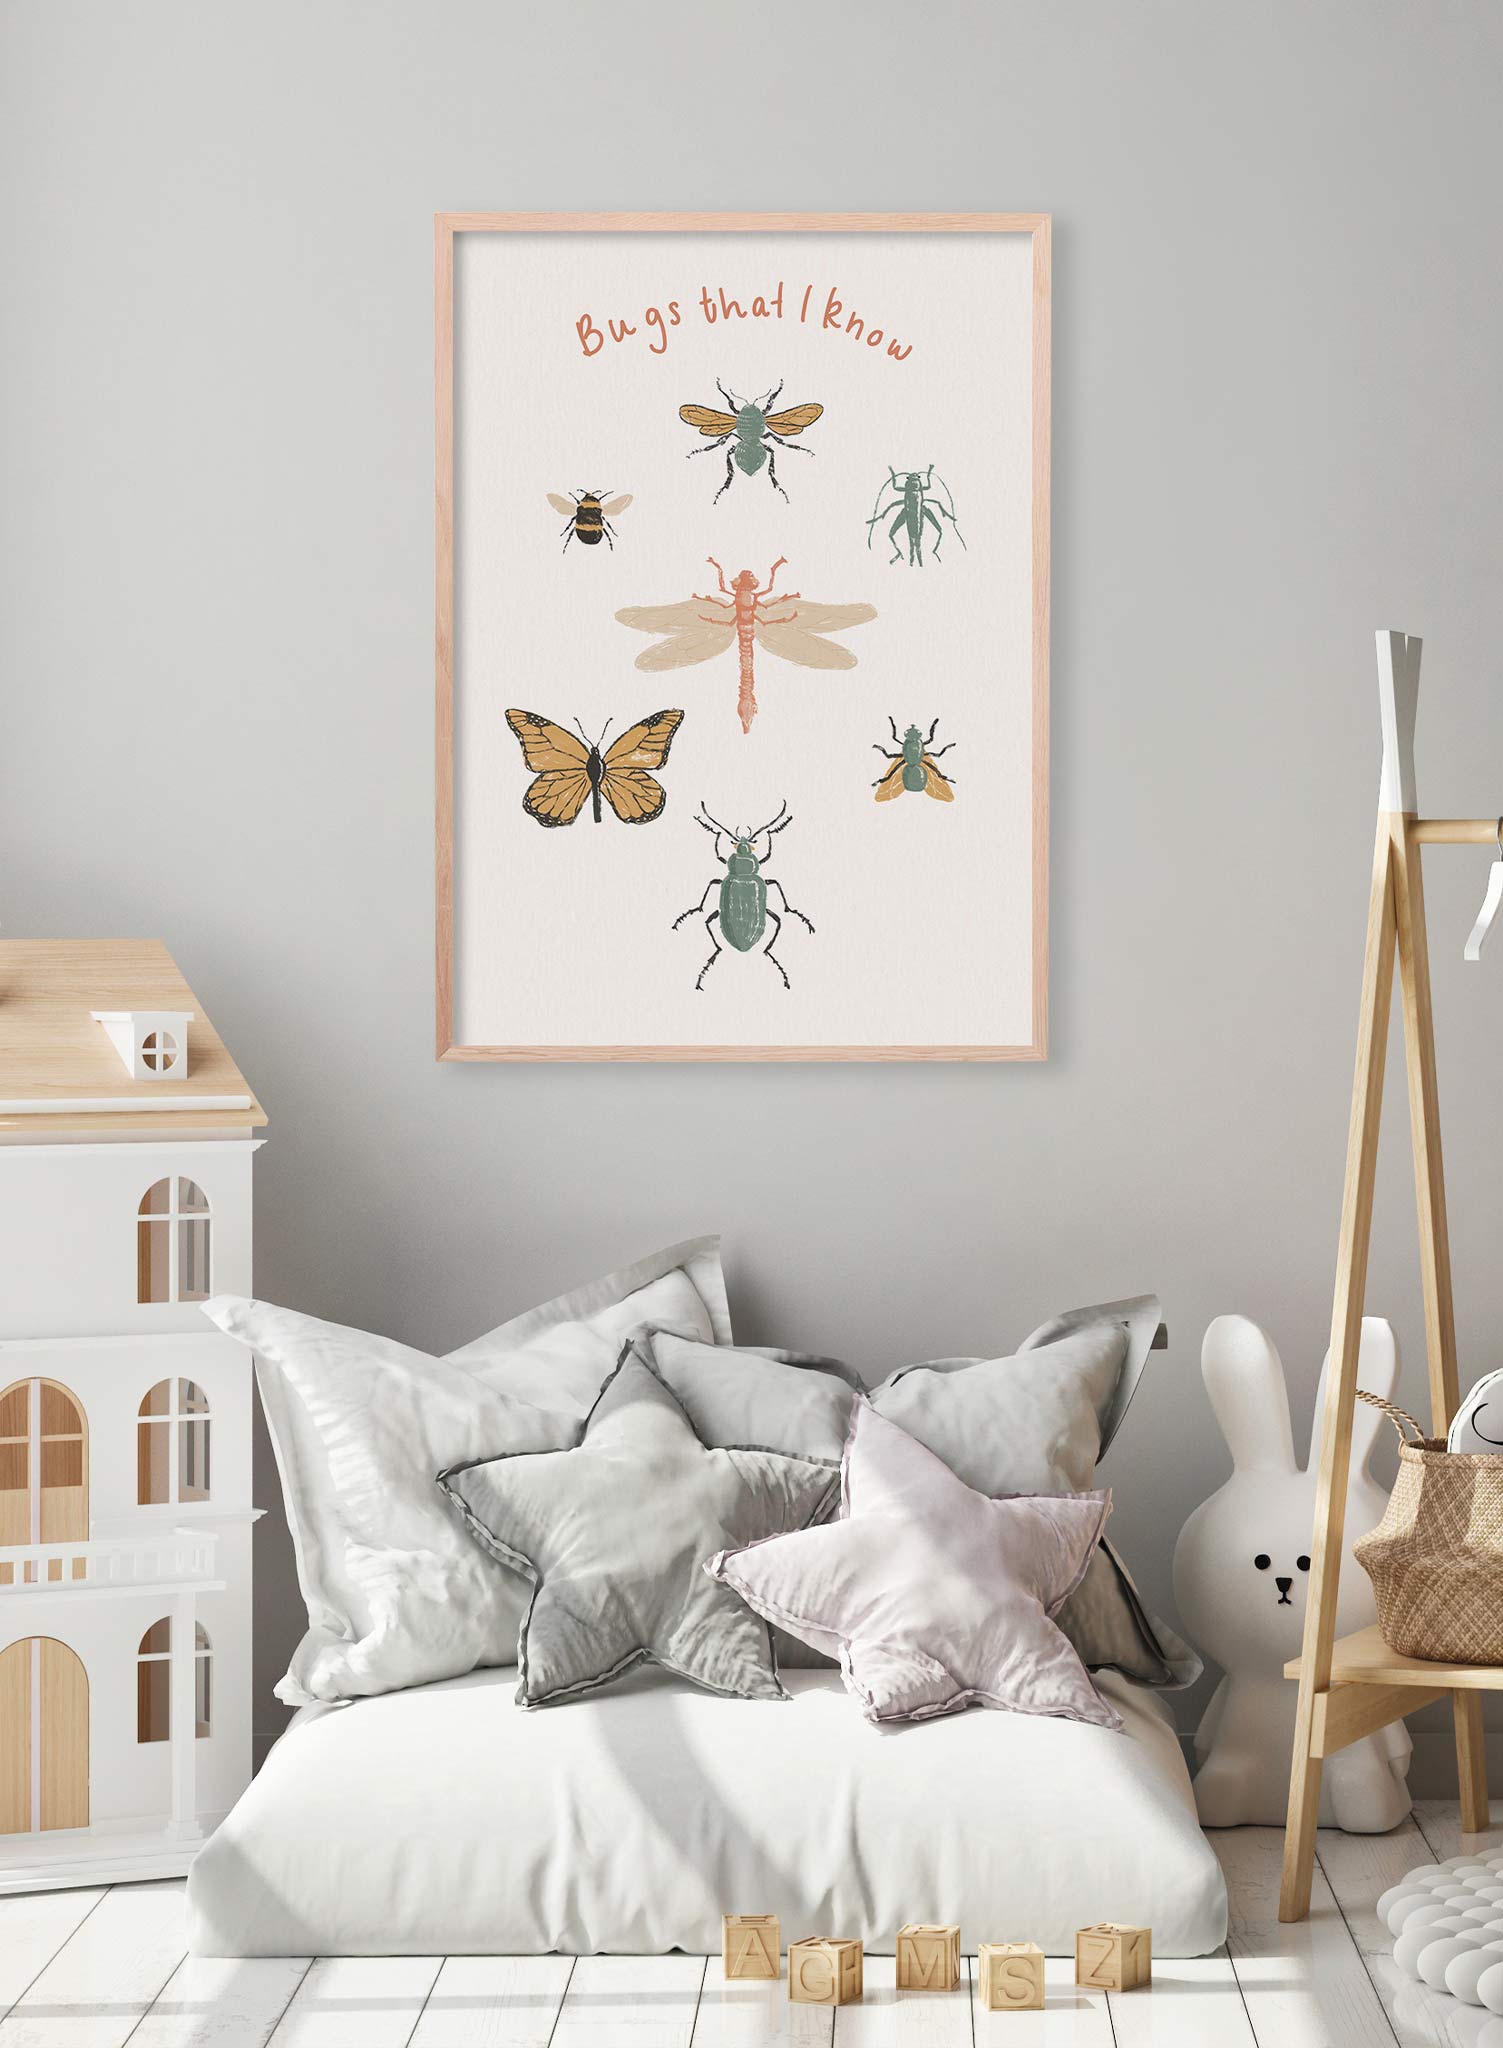 Bug's Life is a minimalist illustration by Opposite Wall of seven different types of commonly found bugs.